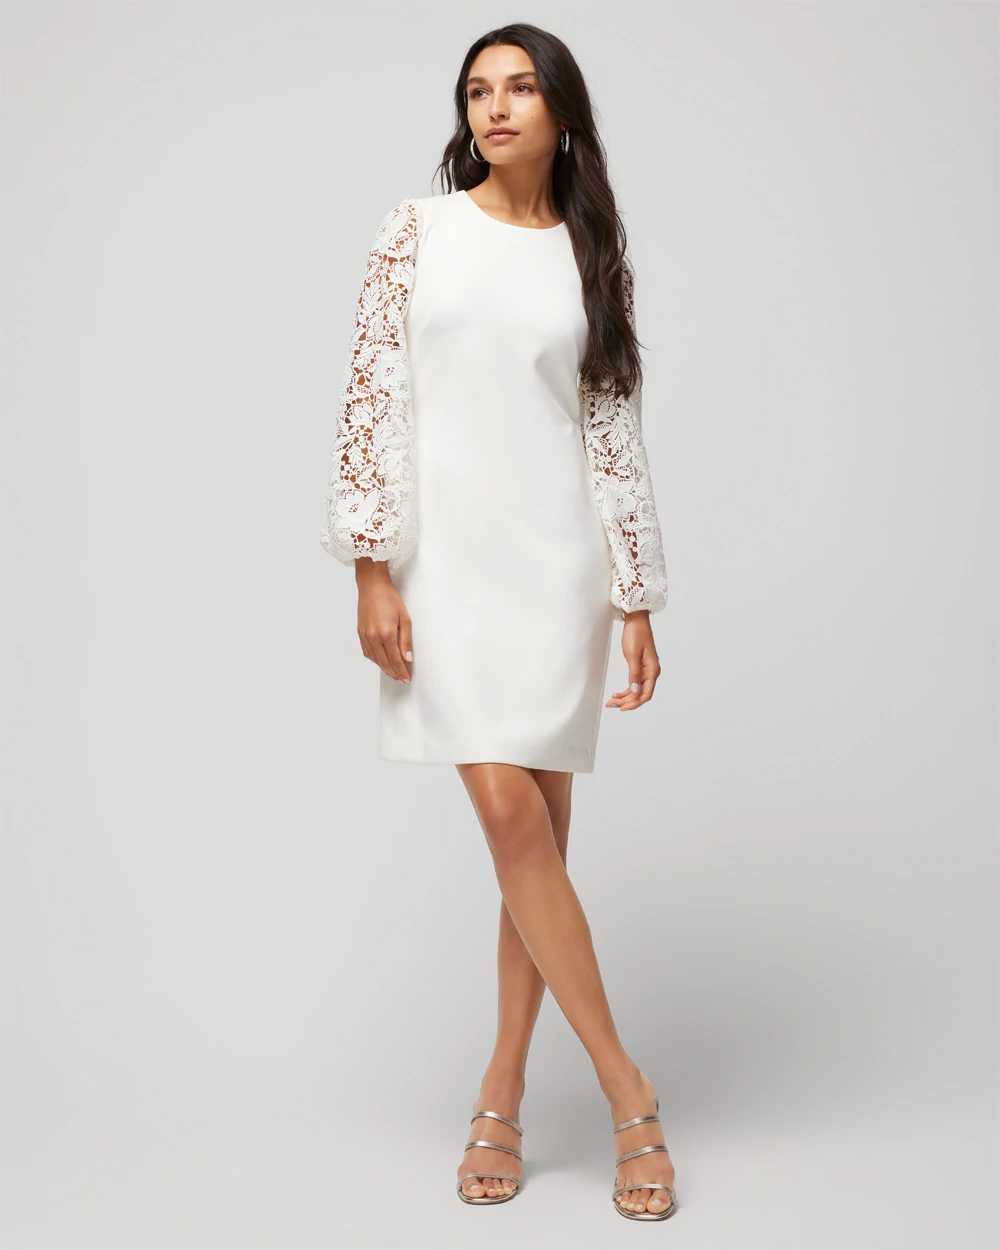 Lace Sleeve Shift Dress click to view larger image.